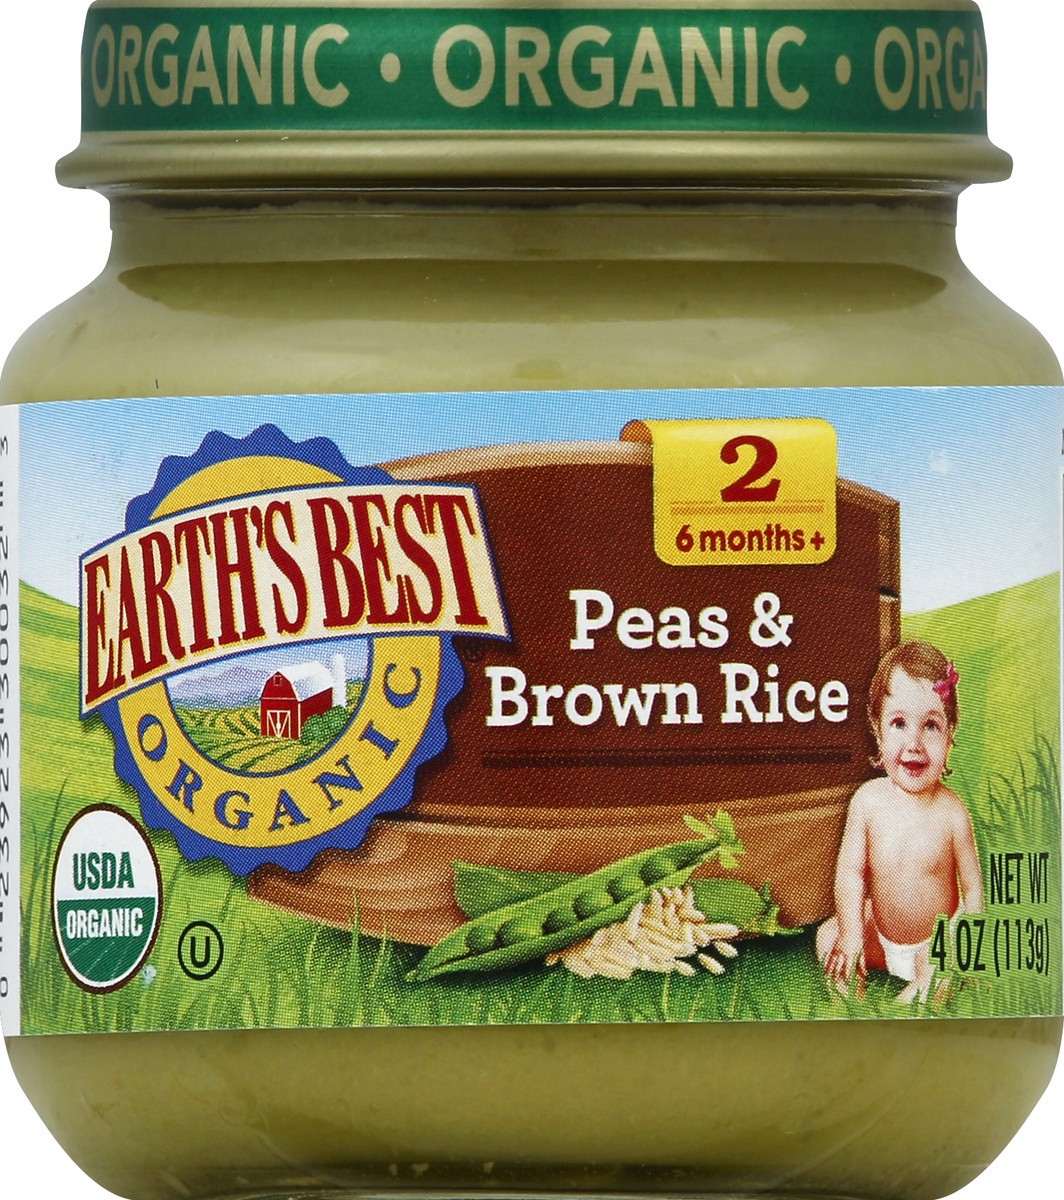 slide 5 of 6, Earth's Best Earths Best Organic Green Peas And Brown Rice Baby Food, 4 oz